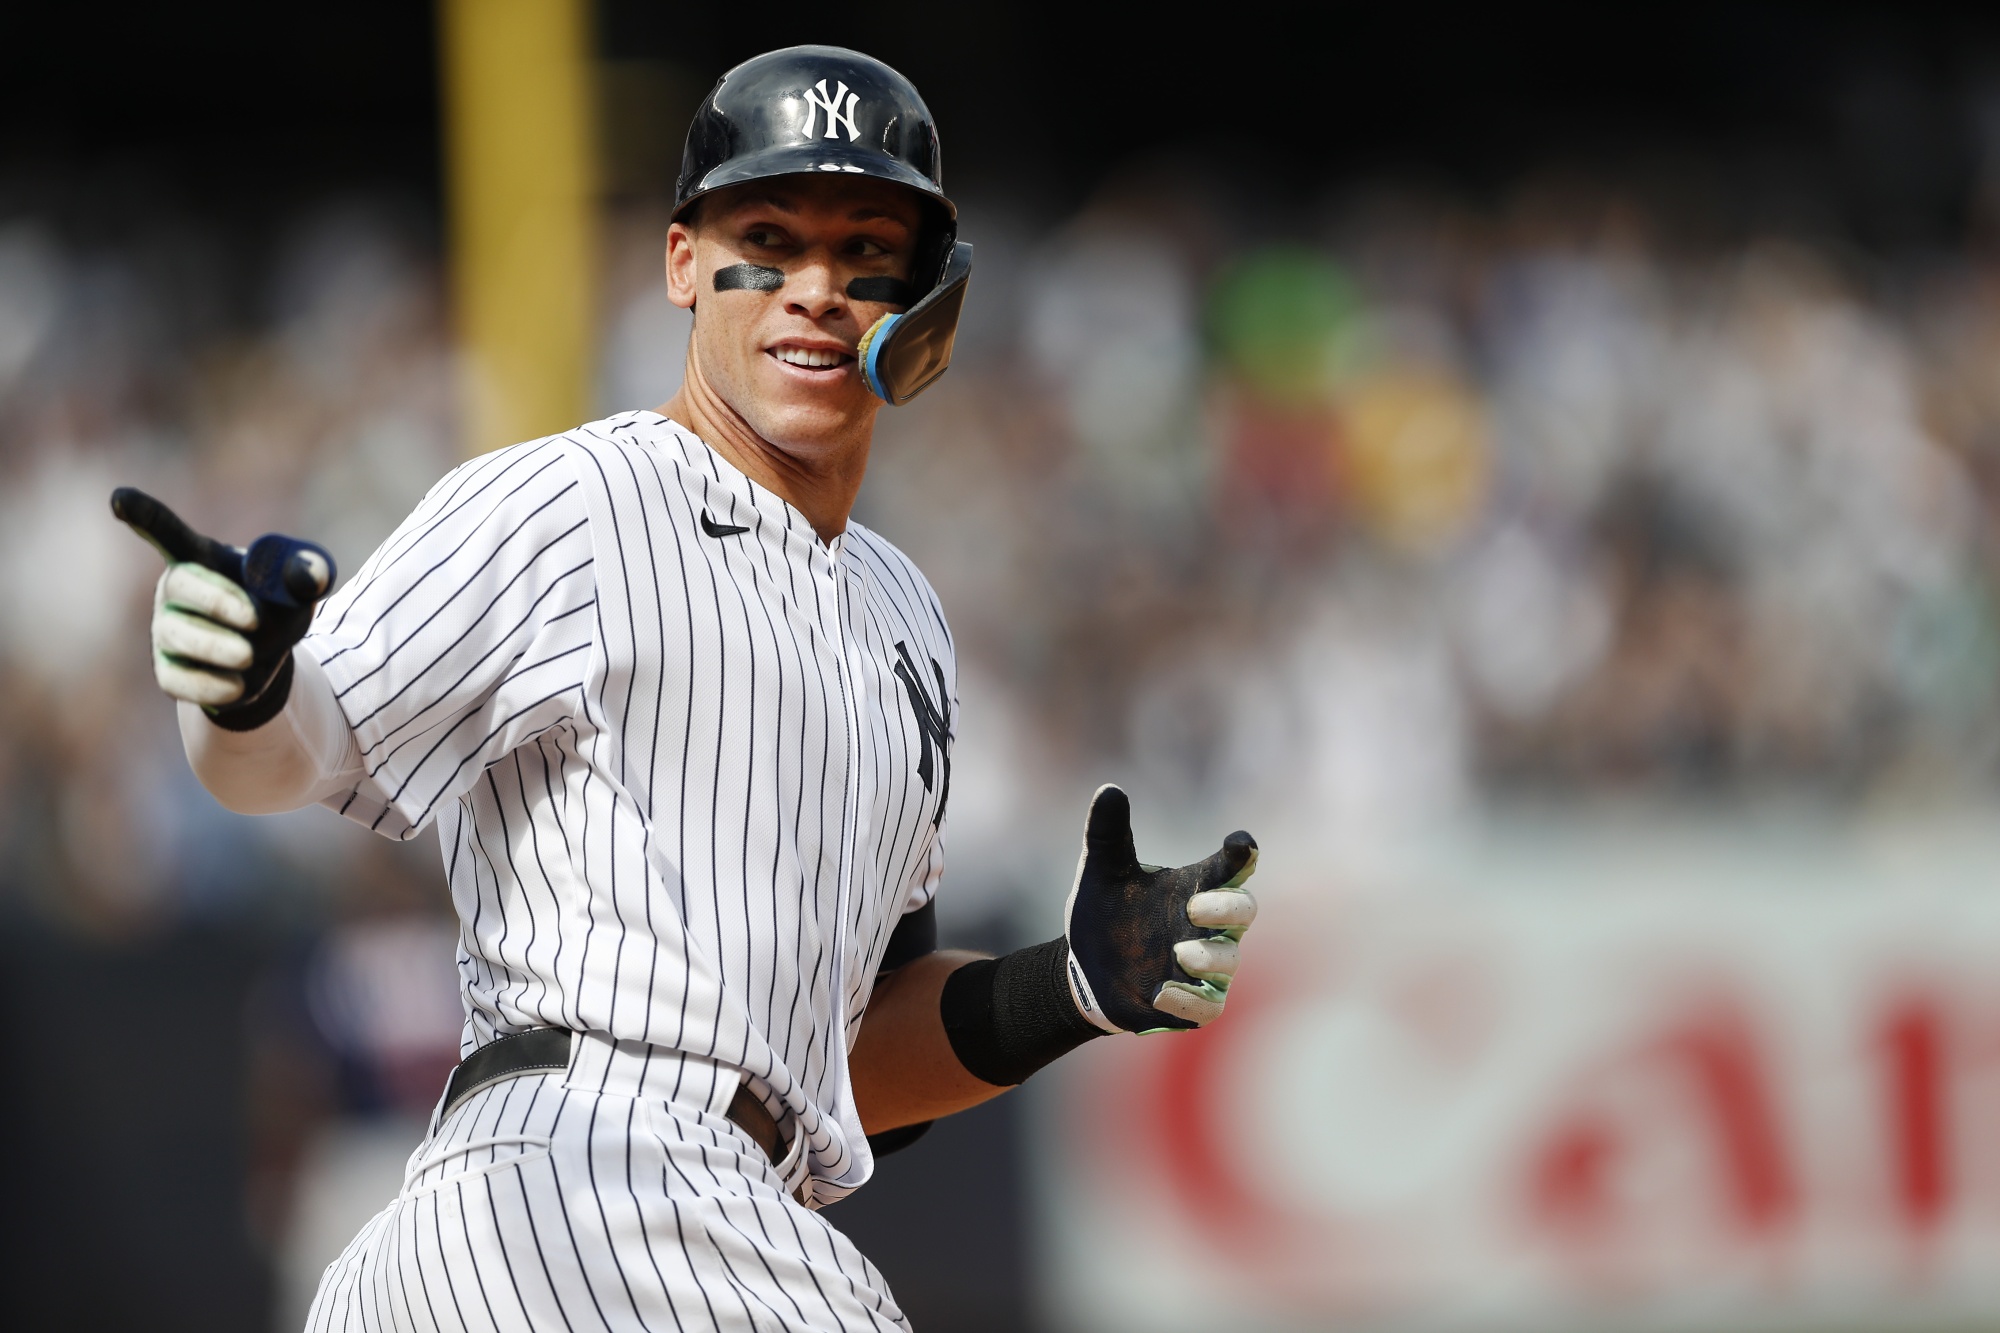 He did it AGAIN! Aaron Judge blasts his 3rd home run of the game